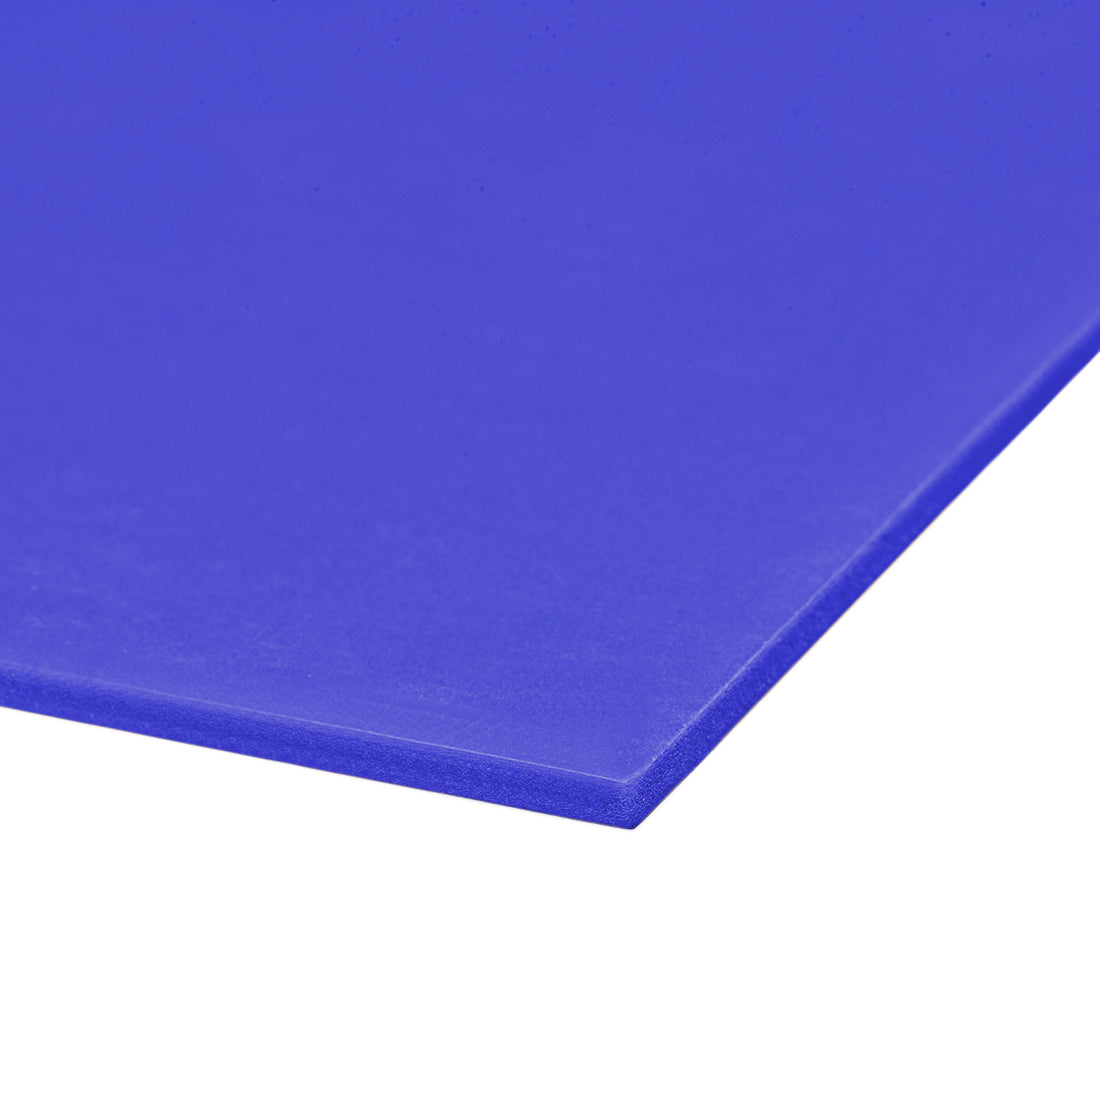 Uxcell Uxcell PVC Foam Board Sheet,3mm T x 8"W x 12“L,Blue,Double Sided,Expanded PVC Sheet,for	Presentations,Signboards,	Artsand	Crafts,Framing,Display,2pcs